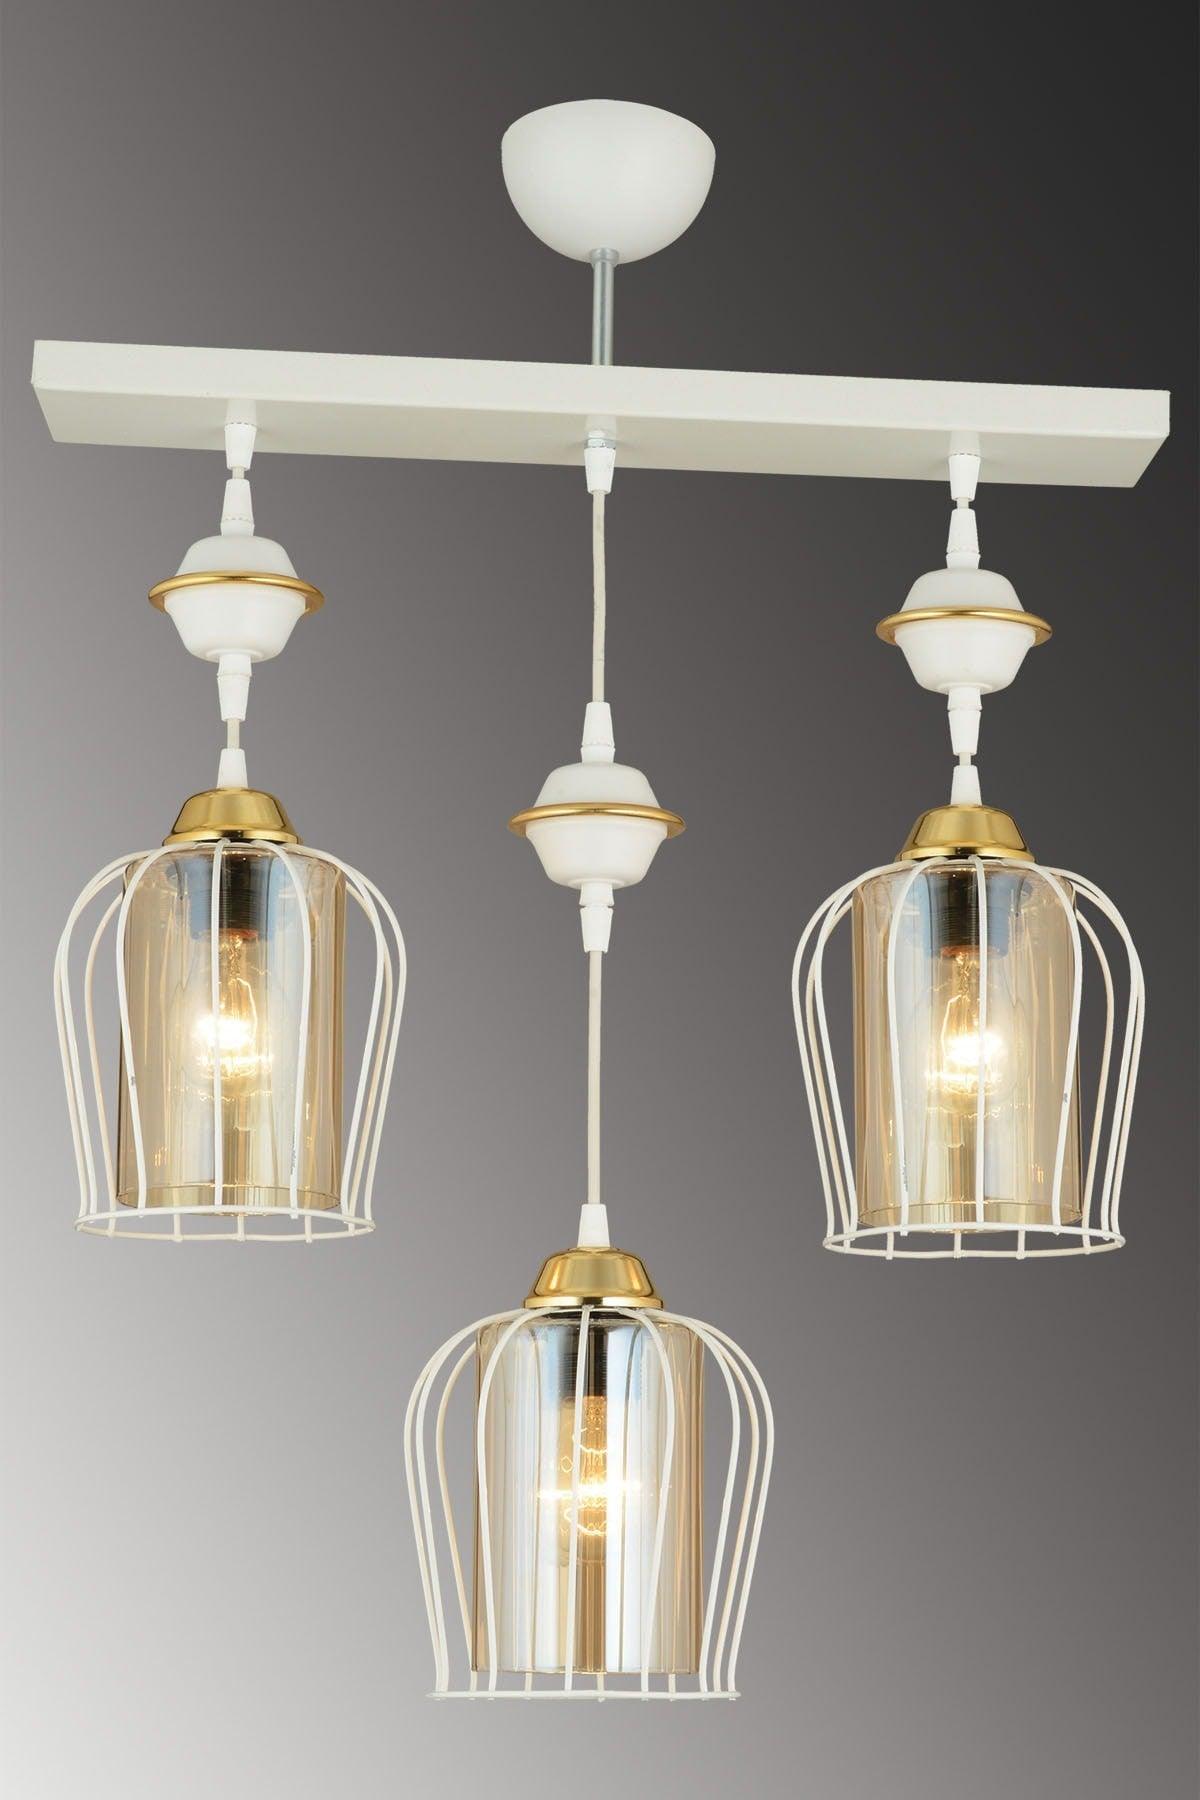 Sequential White Triple Parachute Downward Facing Luxury Chandelier - Swordslife